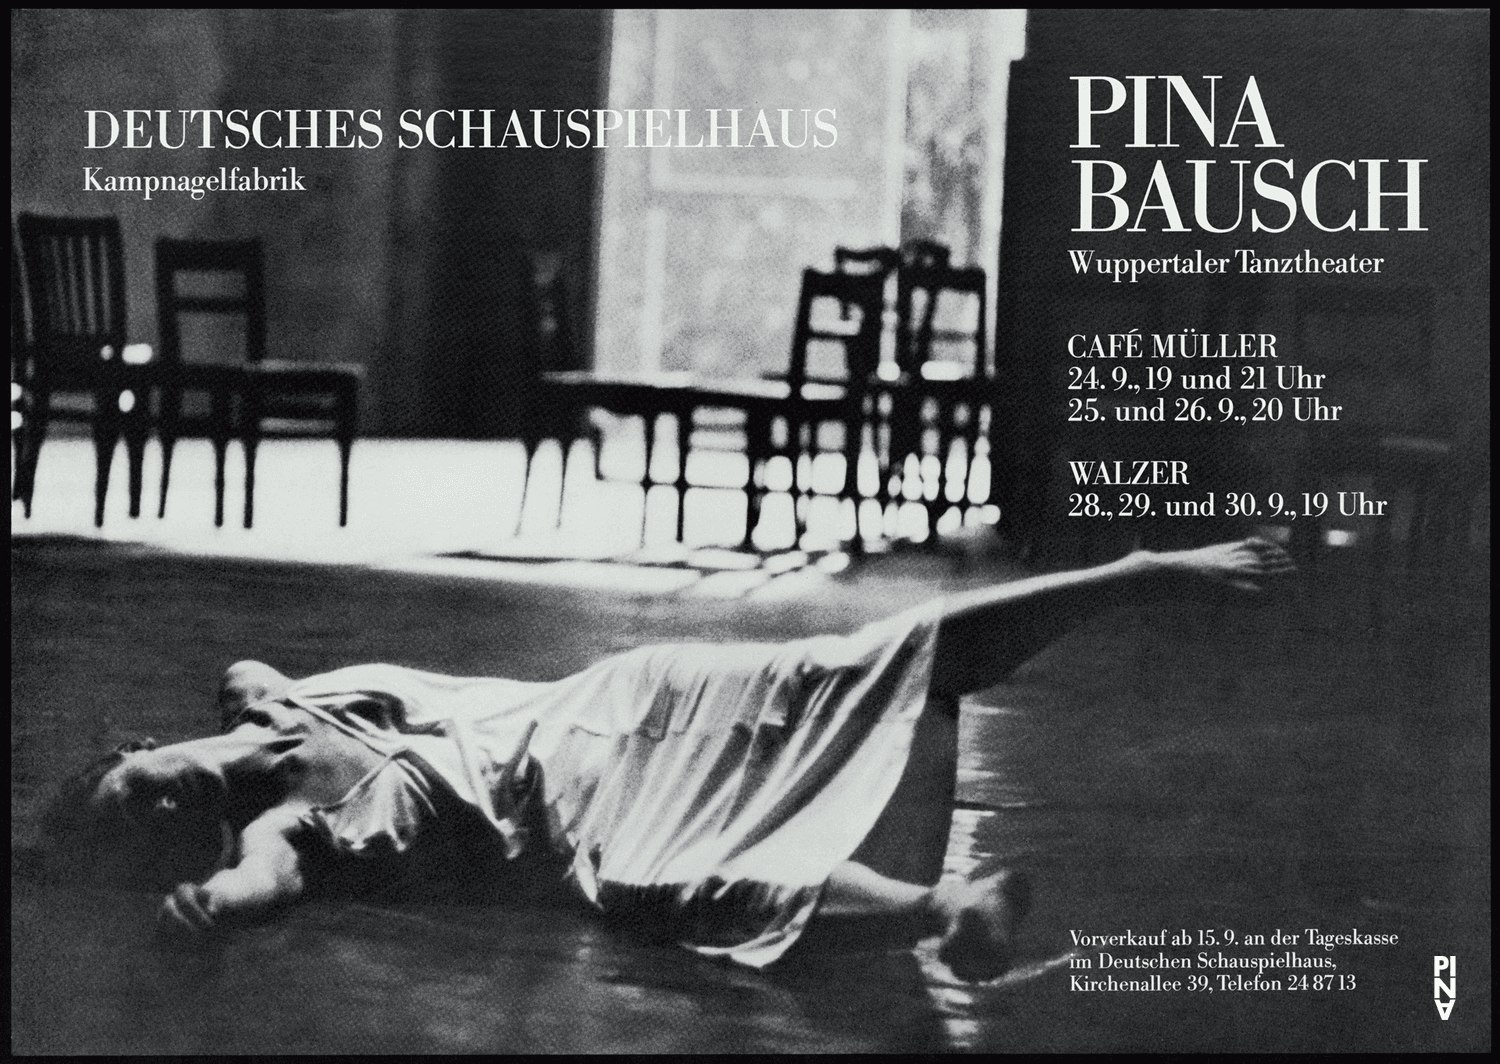 Poster for “Café Müller” and “Walzer” by Pina Bausch in Hamburg, 09/24/1984 – 09/30/1984